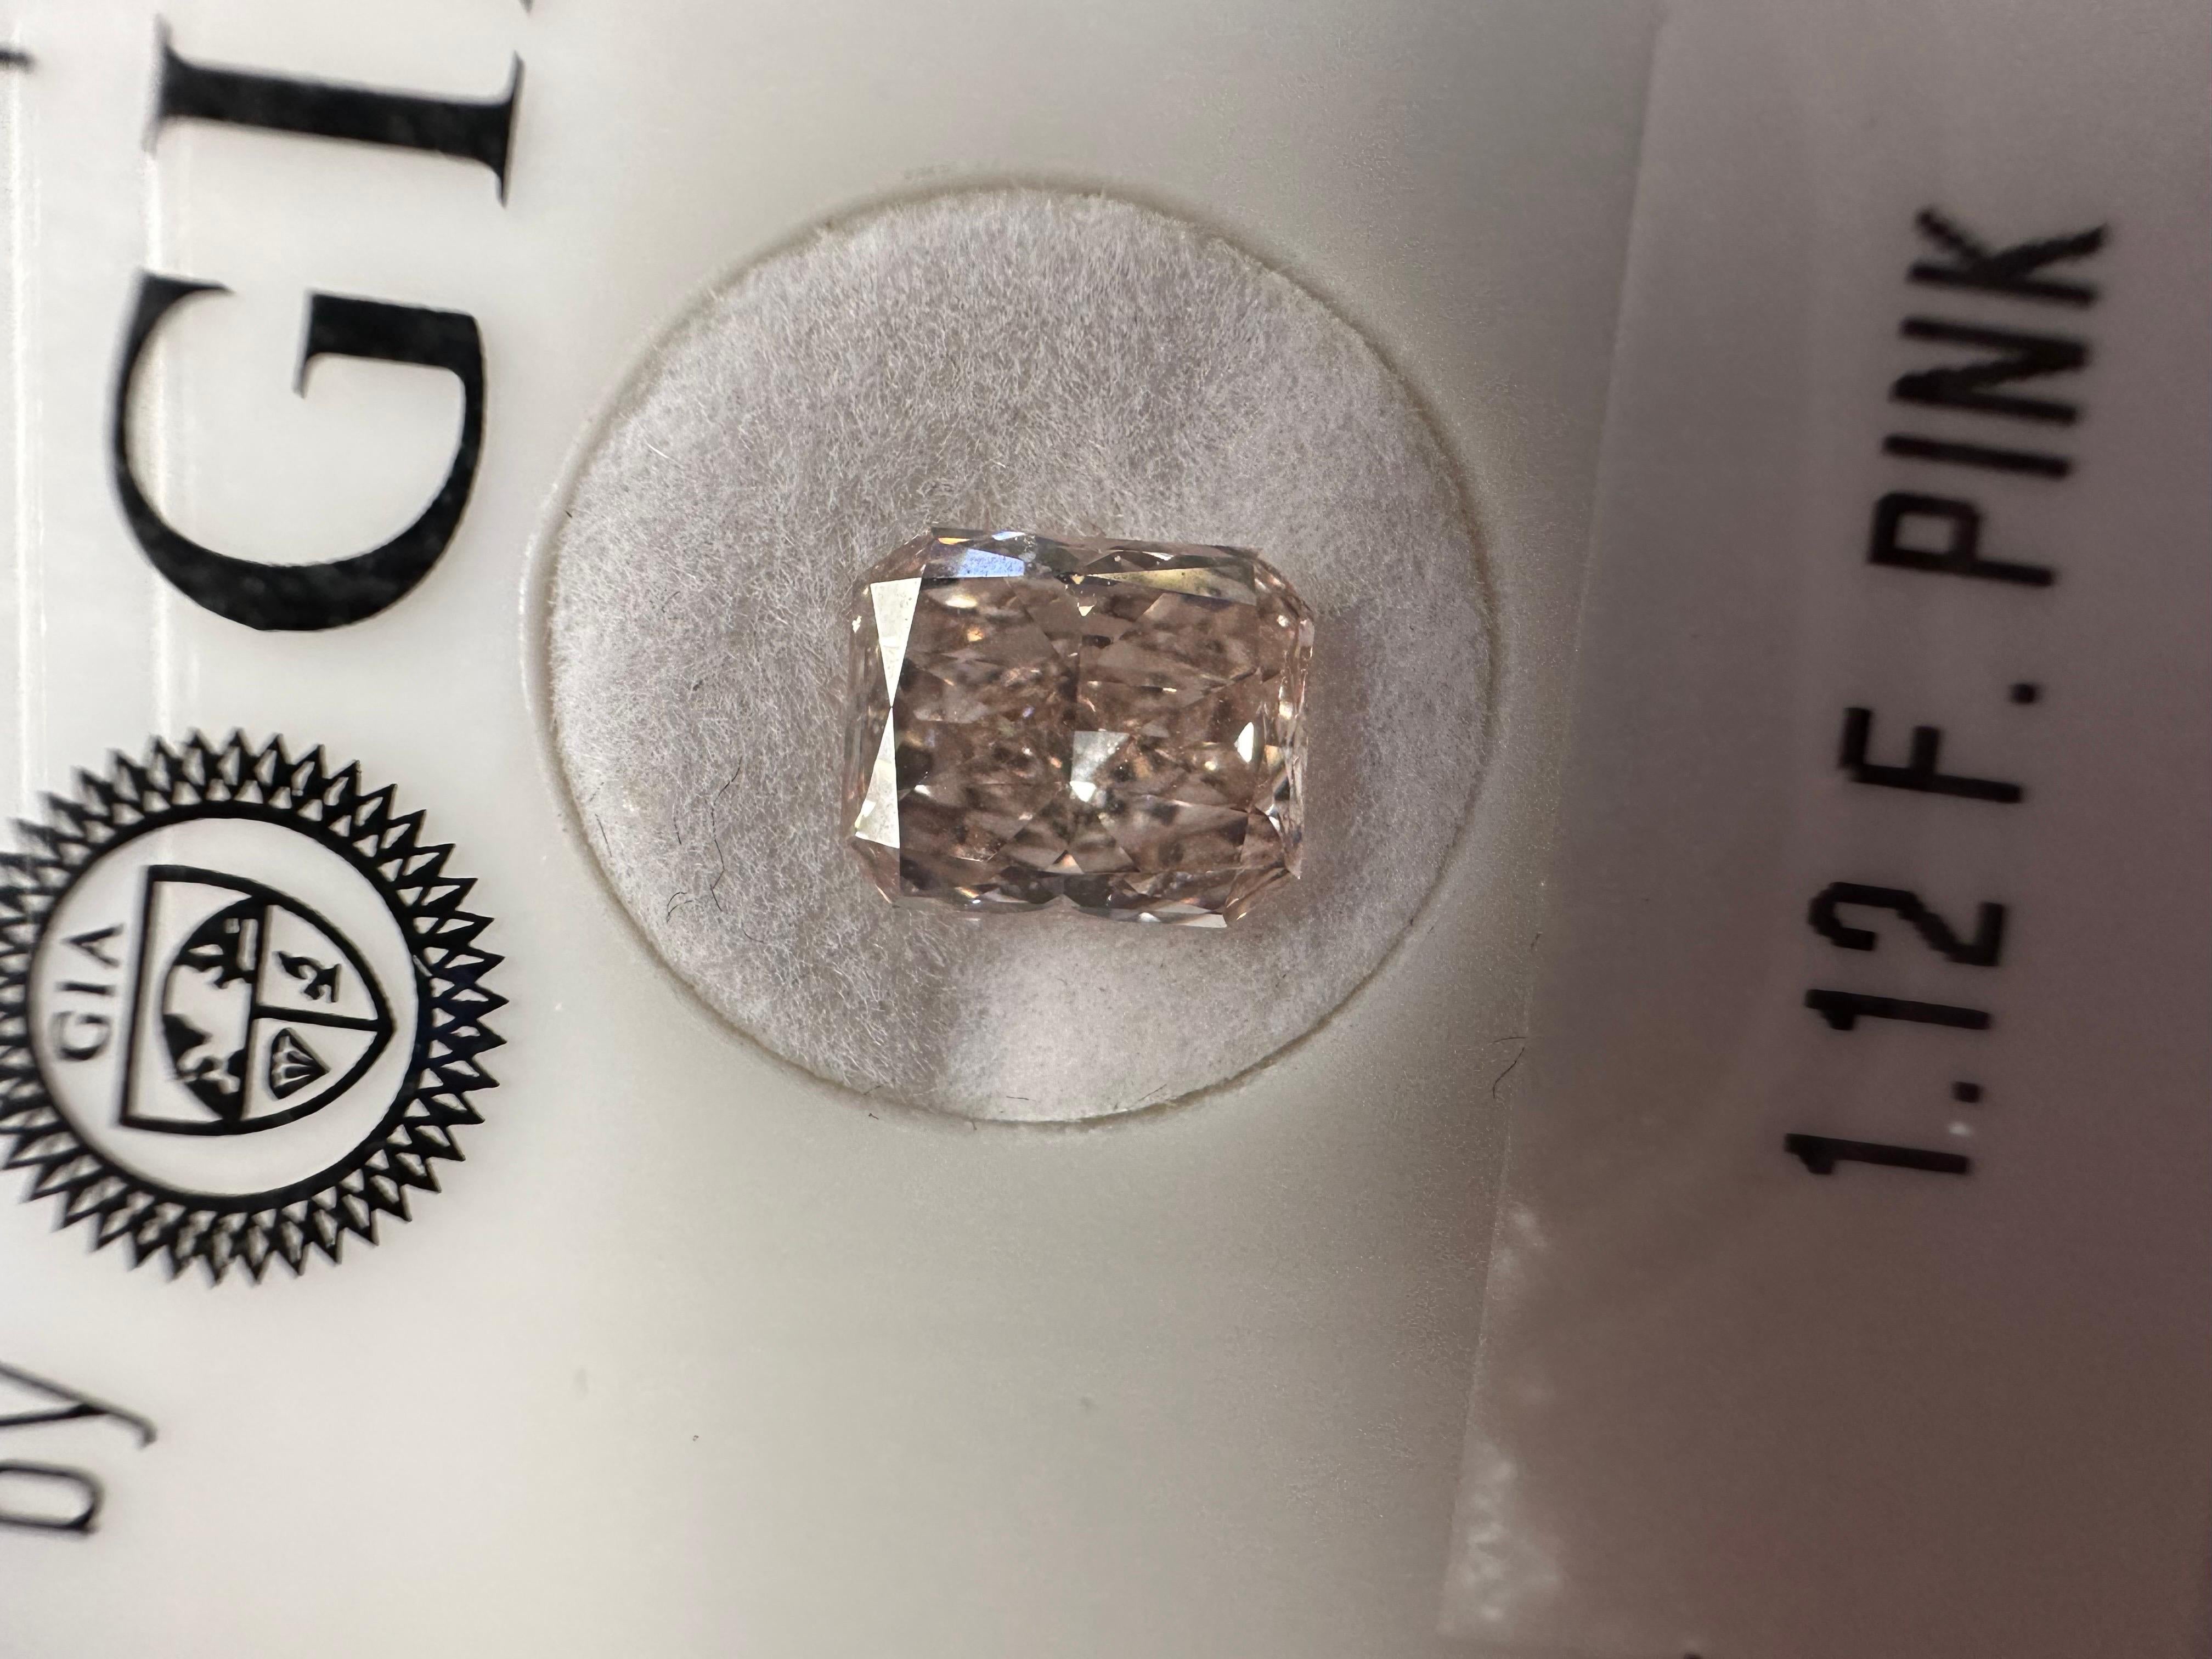 GIA certified diamond, natural fancy pink color 1.12 carats! 

Natural Color Diamond:
Color: Fancy Brown Pink
Cut: Rectangular Brilliant
Carat: 1.12ct
Clarity: VS1

Certificate of authenticity comes with purchase

ABOUT US
We are a family-owned